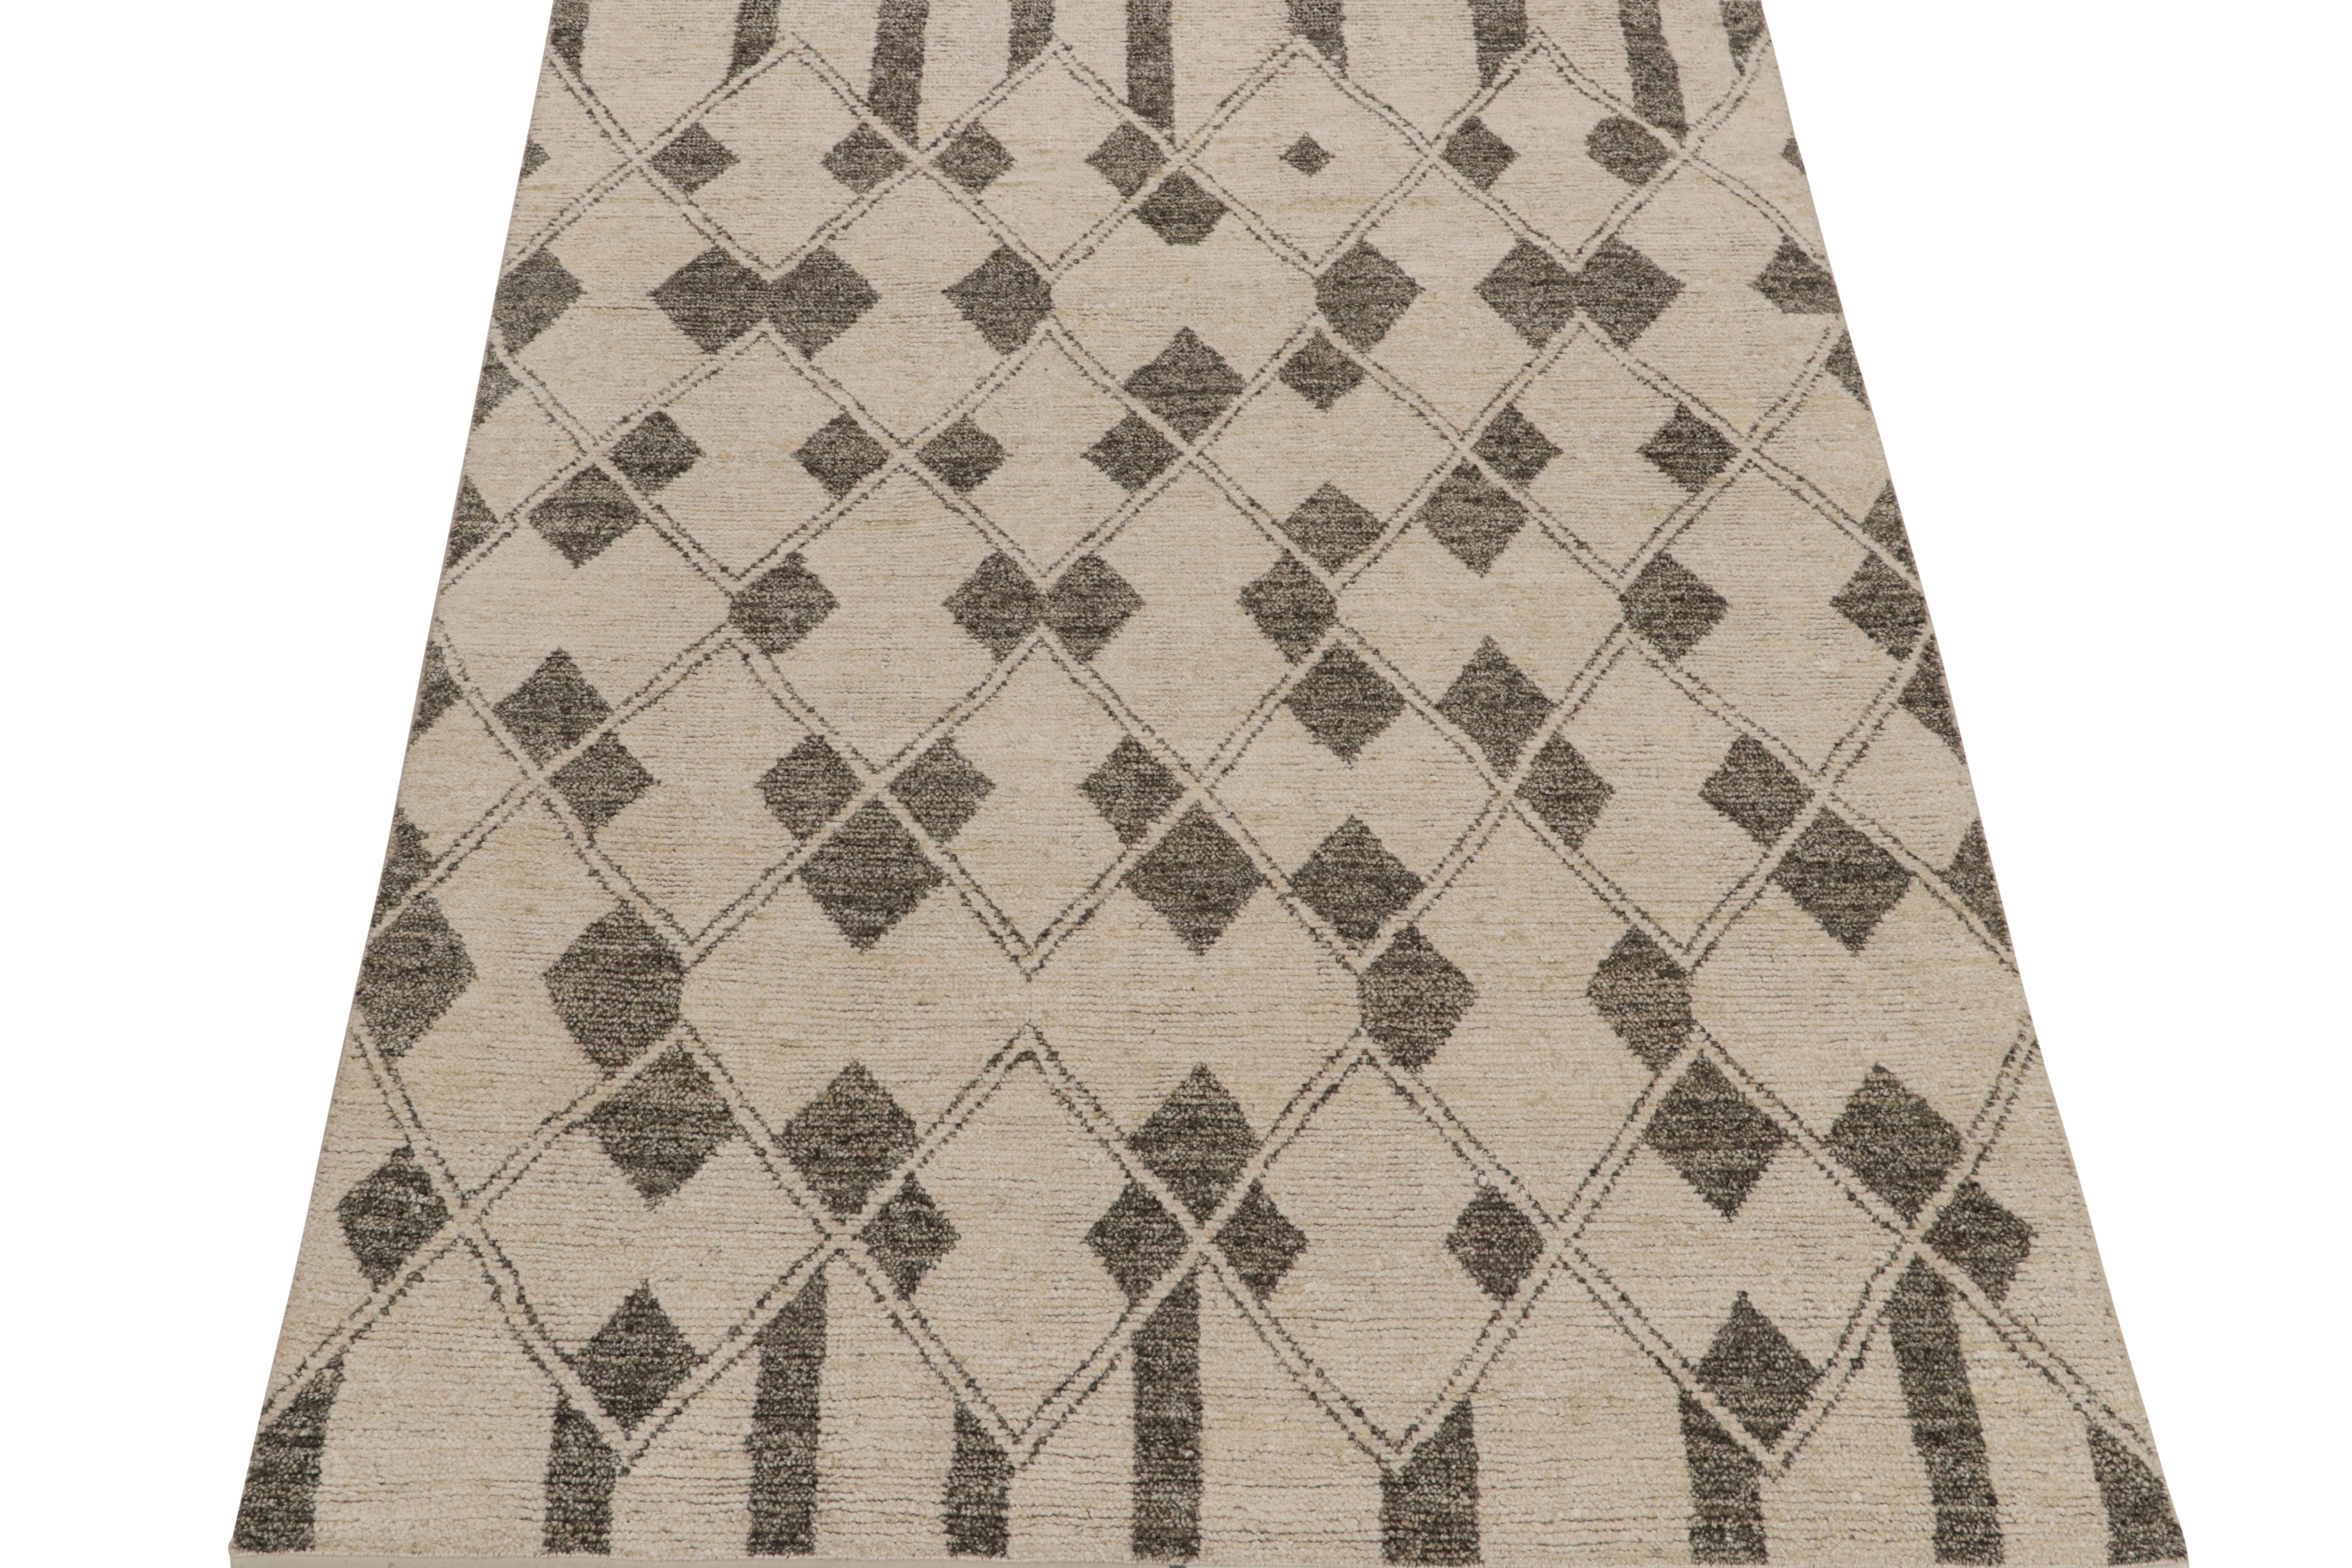 Tribal Rug & Kilim’s Moroccan Style Rug in Beige with Gray Diamond Patterns For Sale